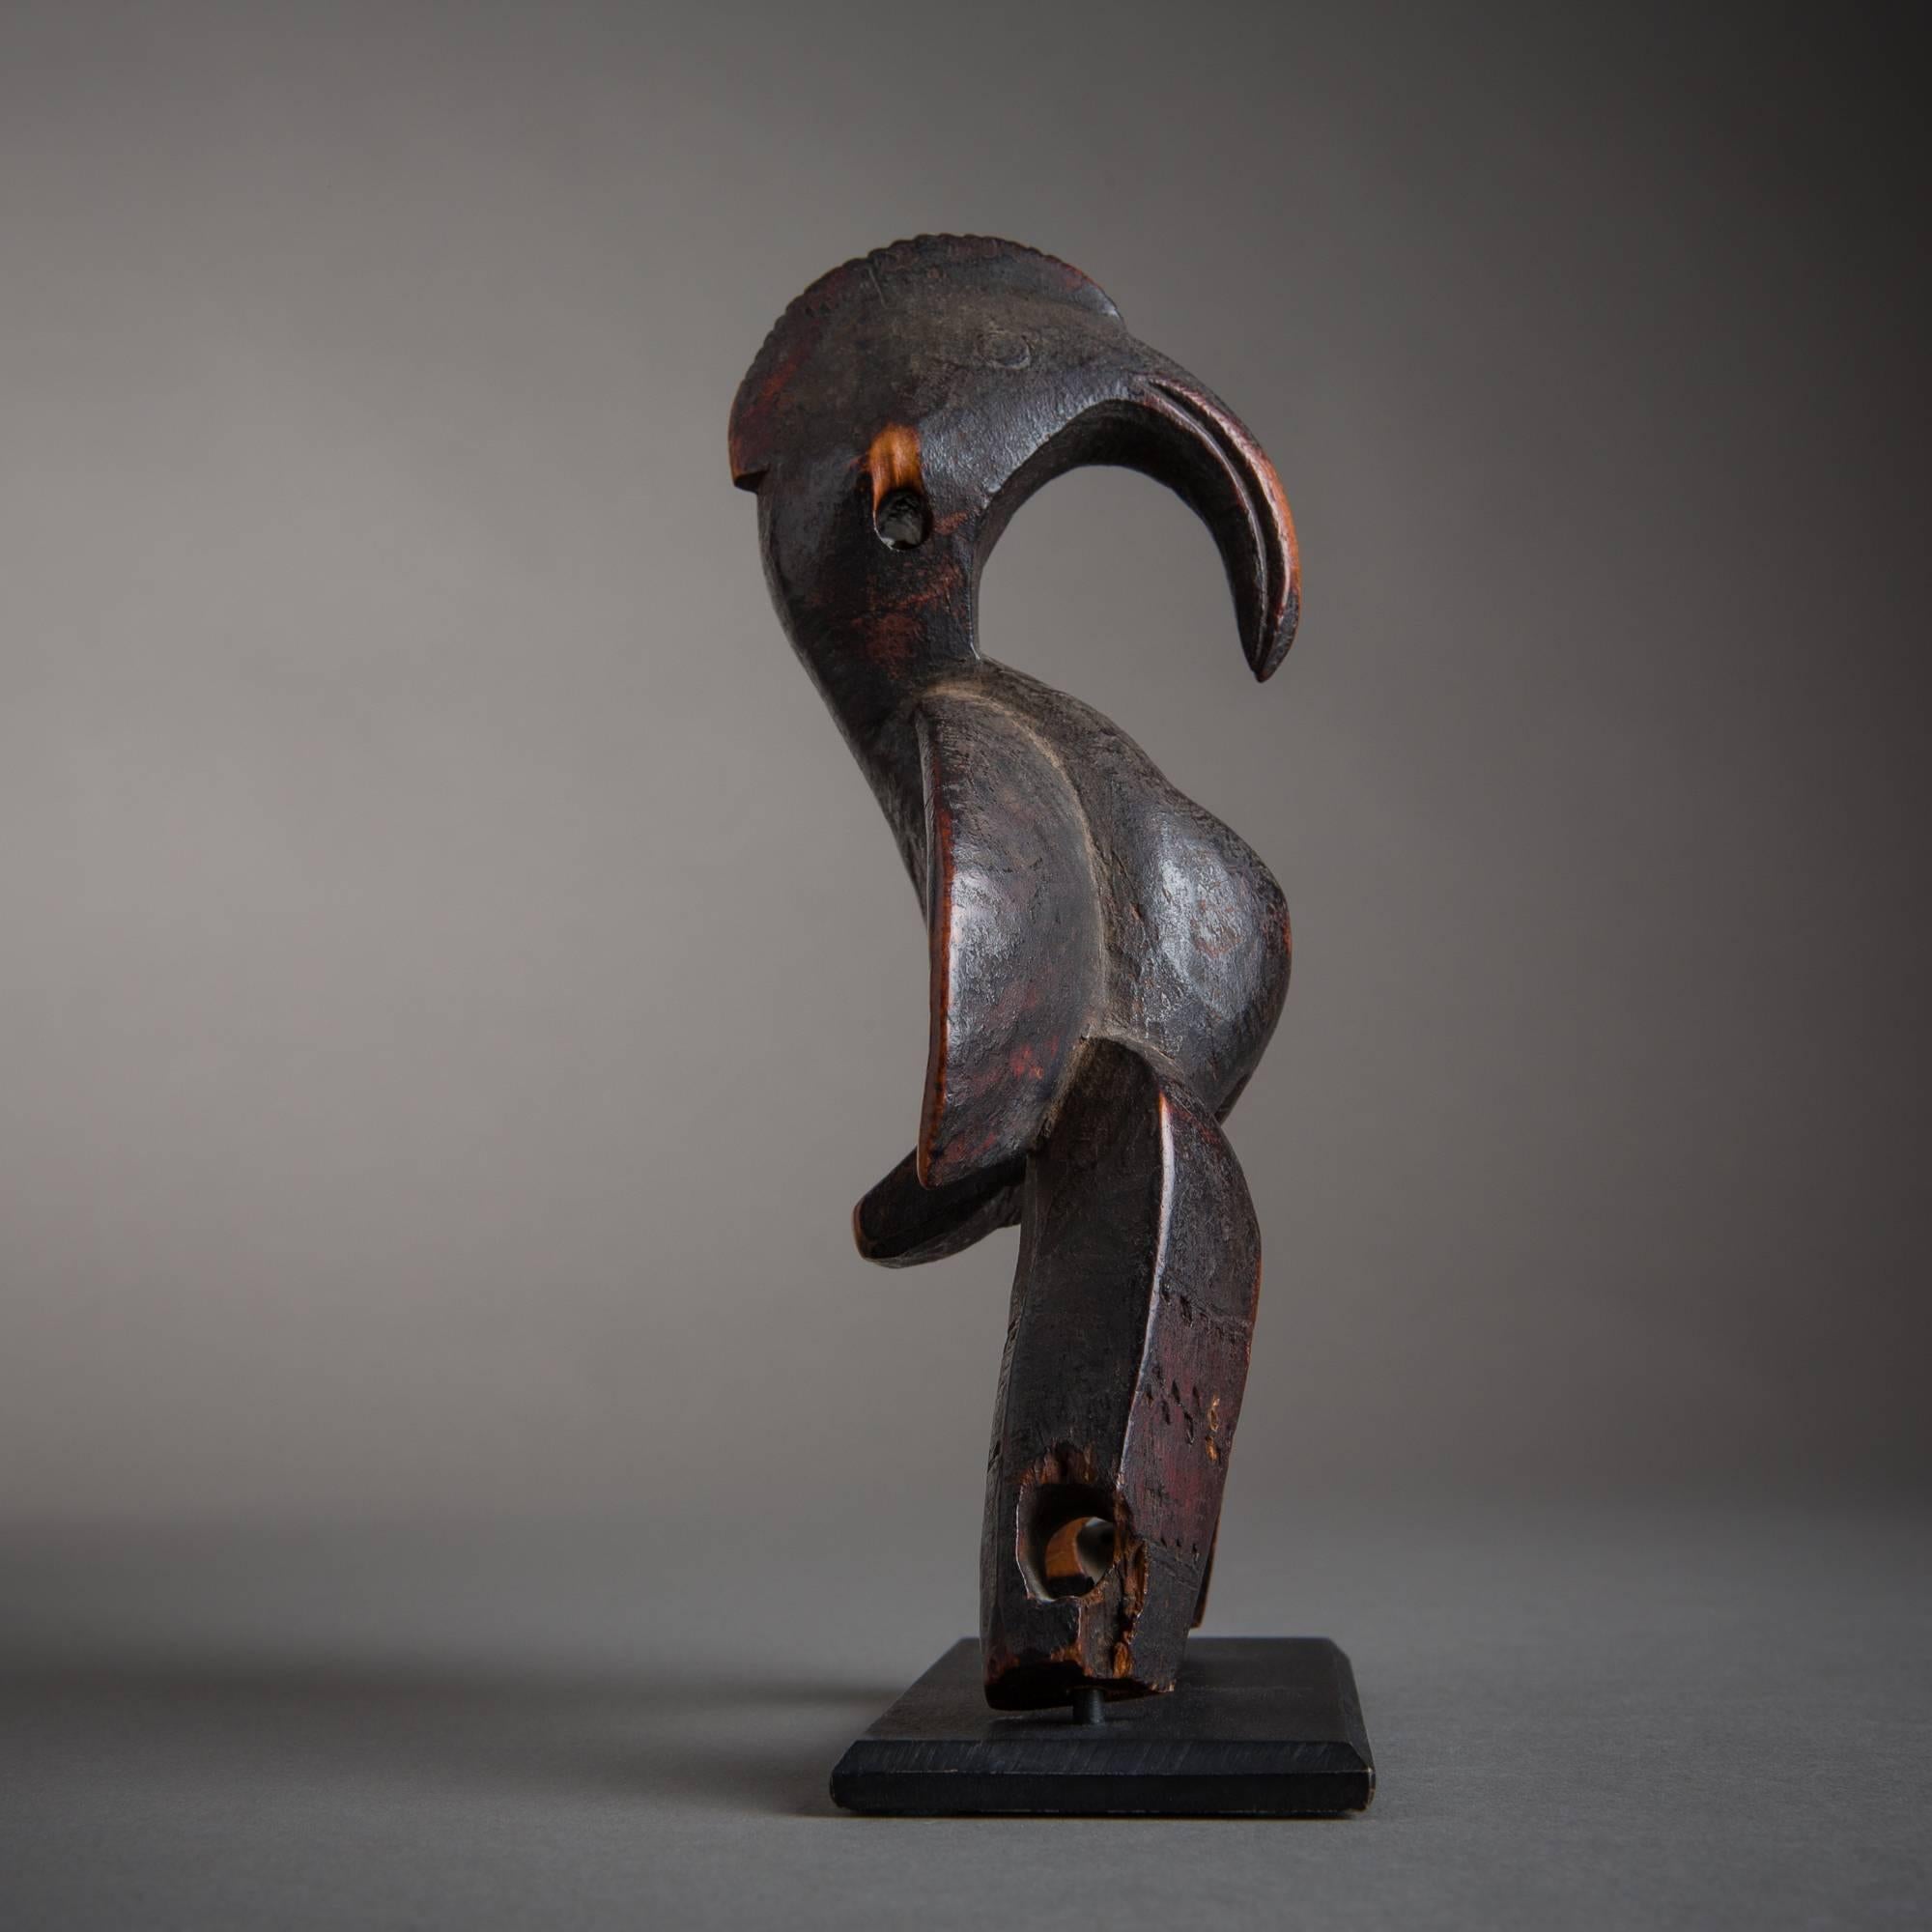 A deeply patinated pulley depicting an avian figure with anthropomorphic characteristics, dominated by an elongated, overhanging head with gracefully curved beak. The concavity of the figure’s reverse side contrasts strongly with the obverse, from